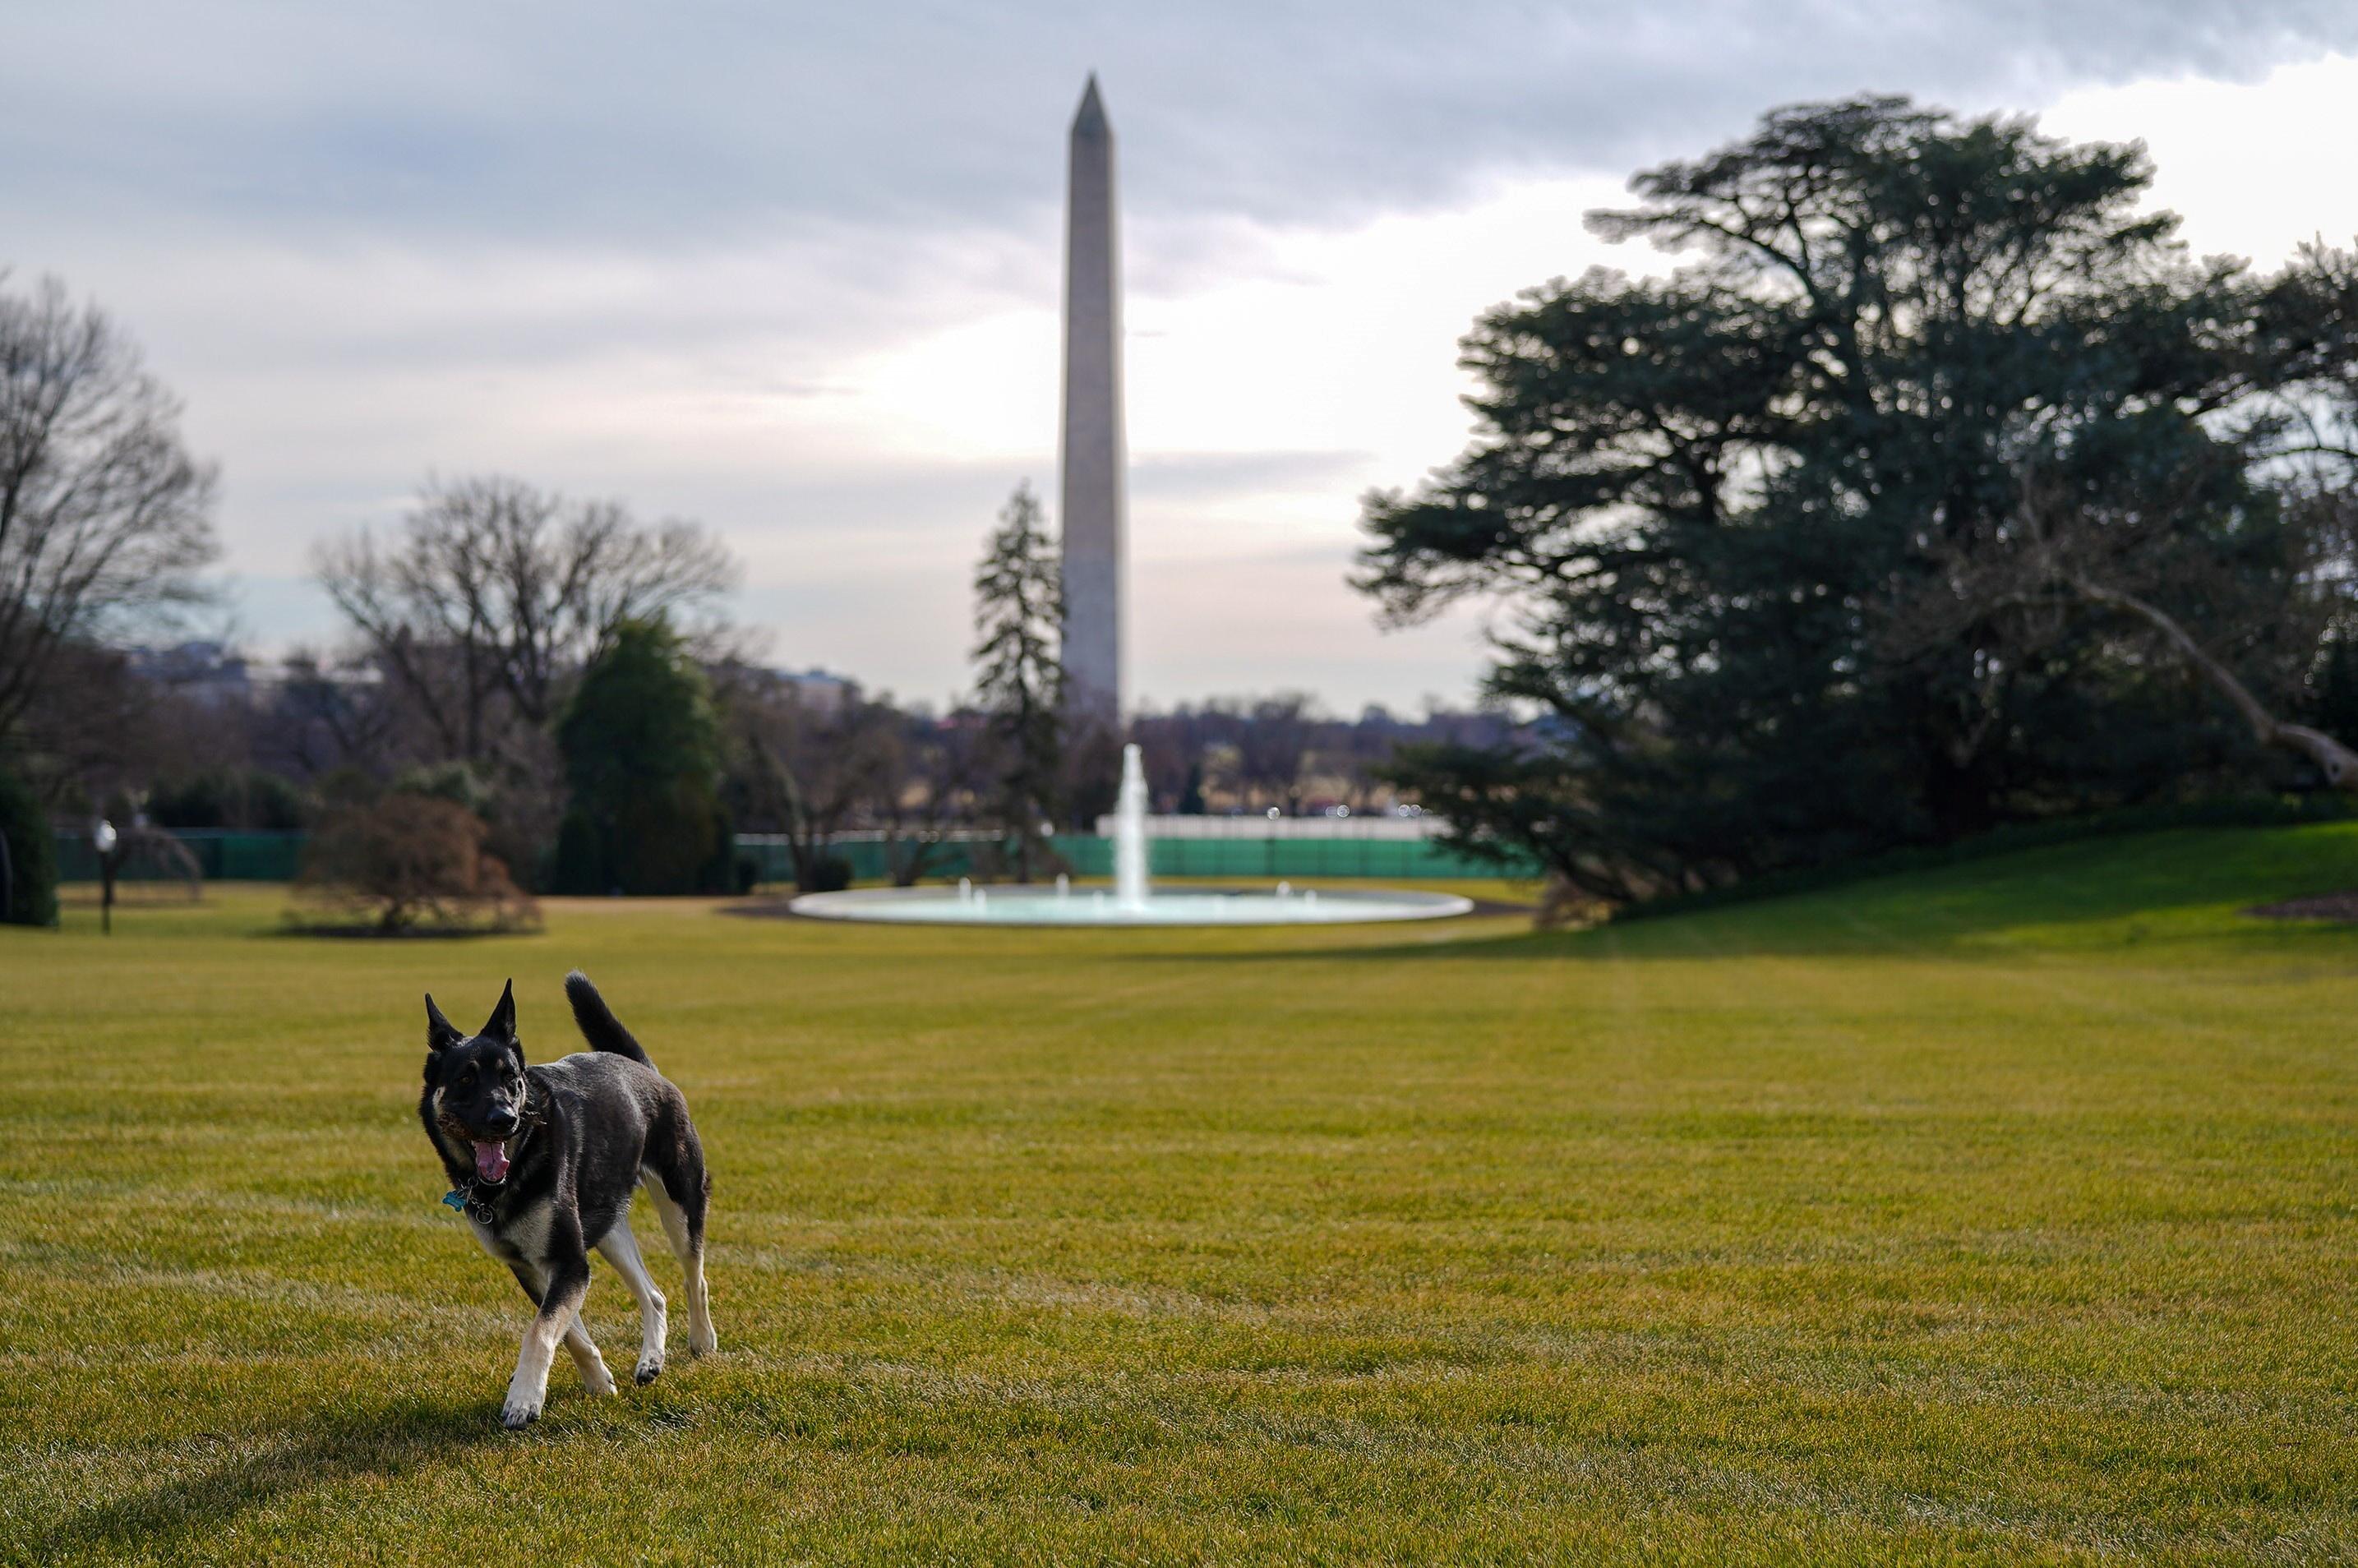 Biden 'First Dogs' arrive at White House